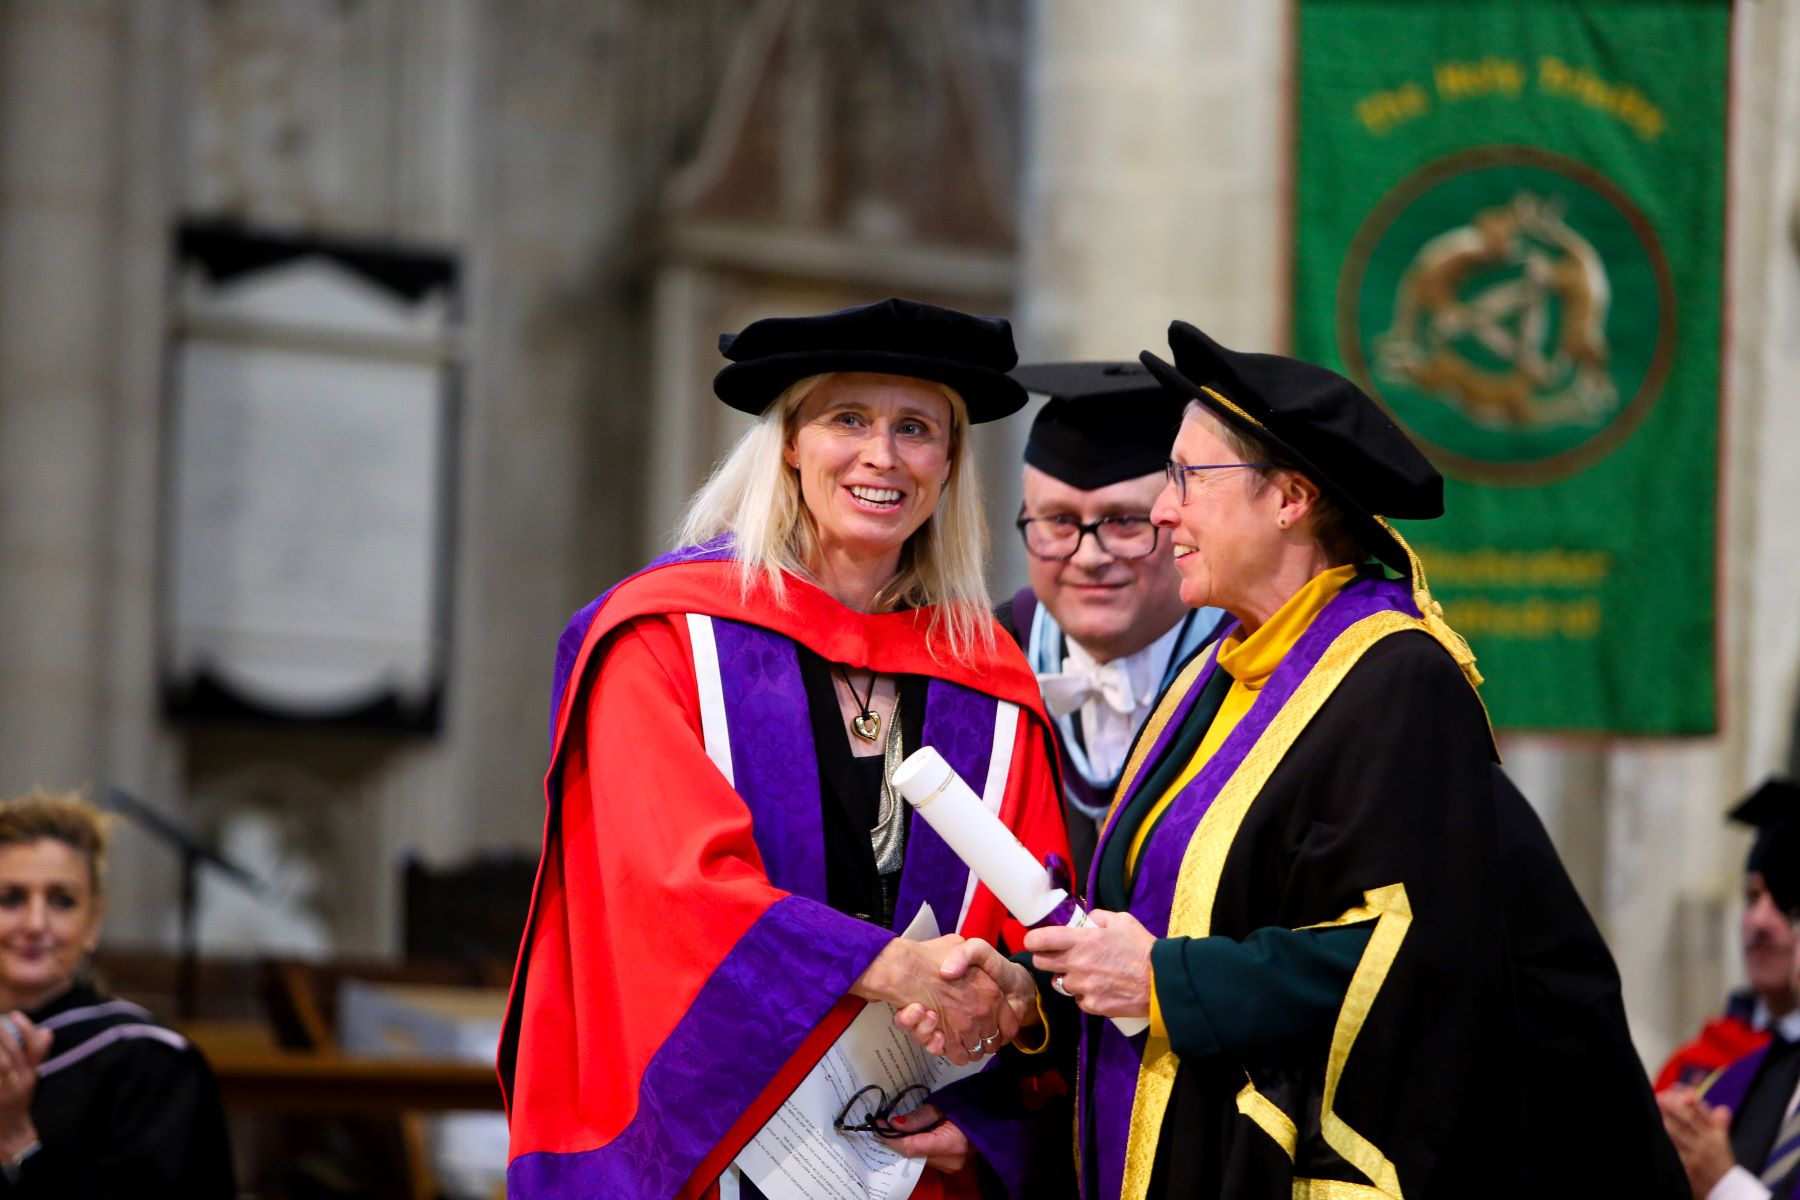 Two women in academic robes at graduation